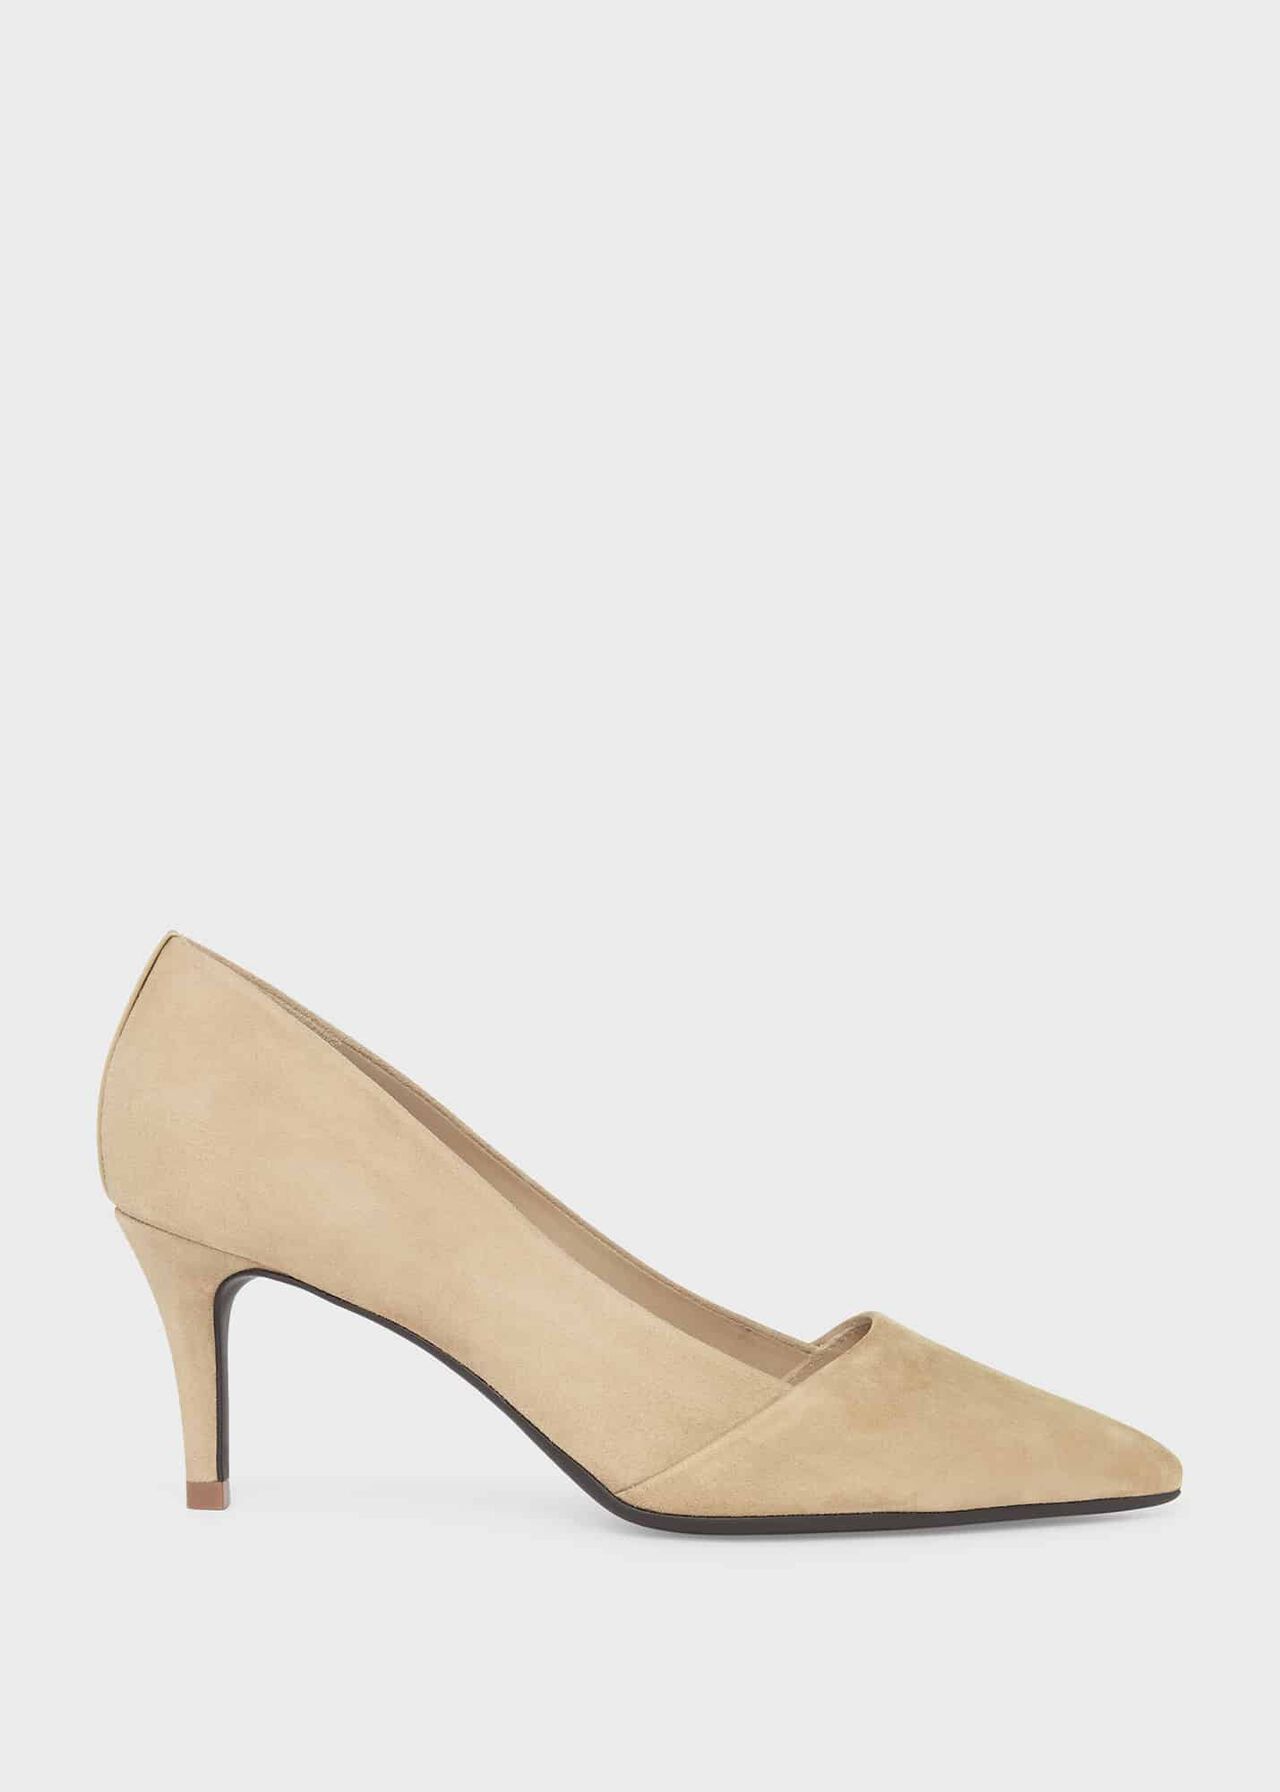 tabe tilbede Kabelbane Rowan Suede Court Shoes | Hobbs